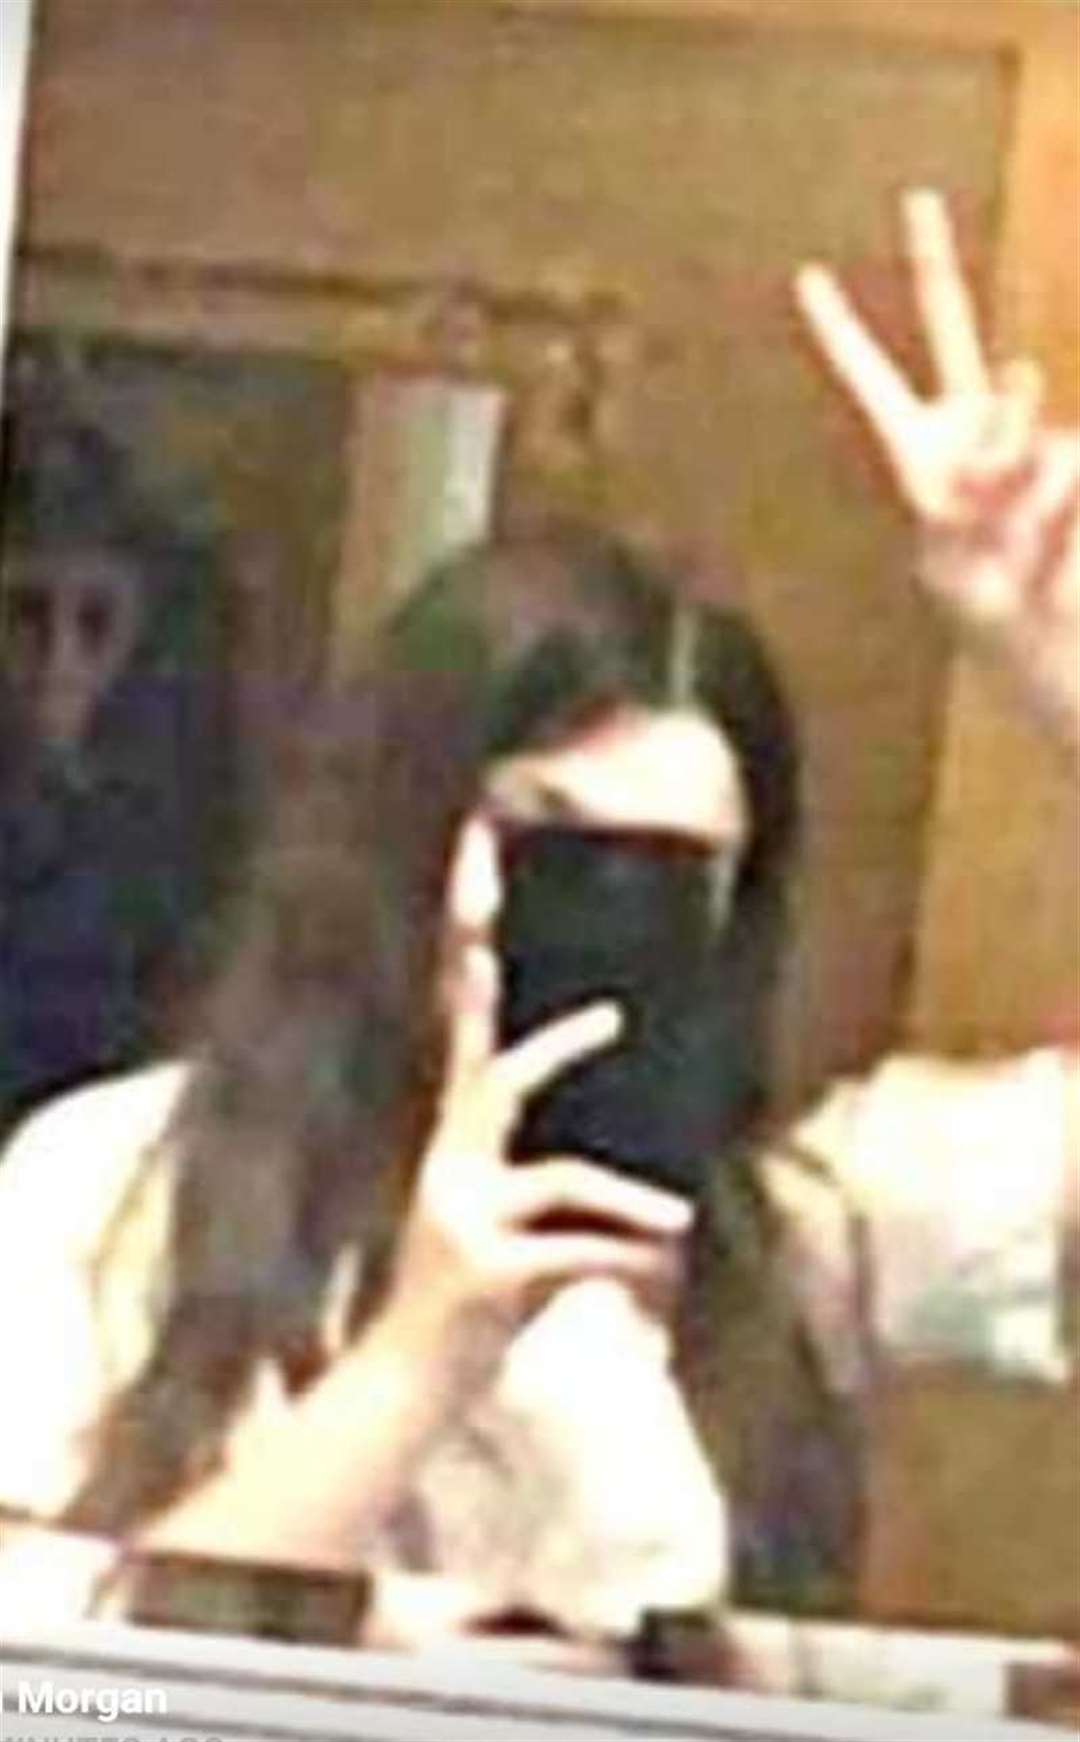 Ghost on the left hand side of the photo in a screenshot while they were having a facetime call